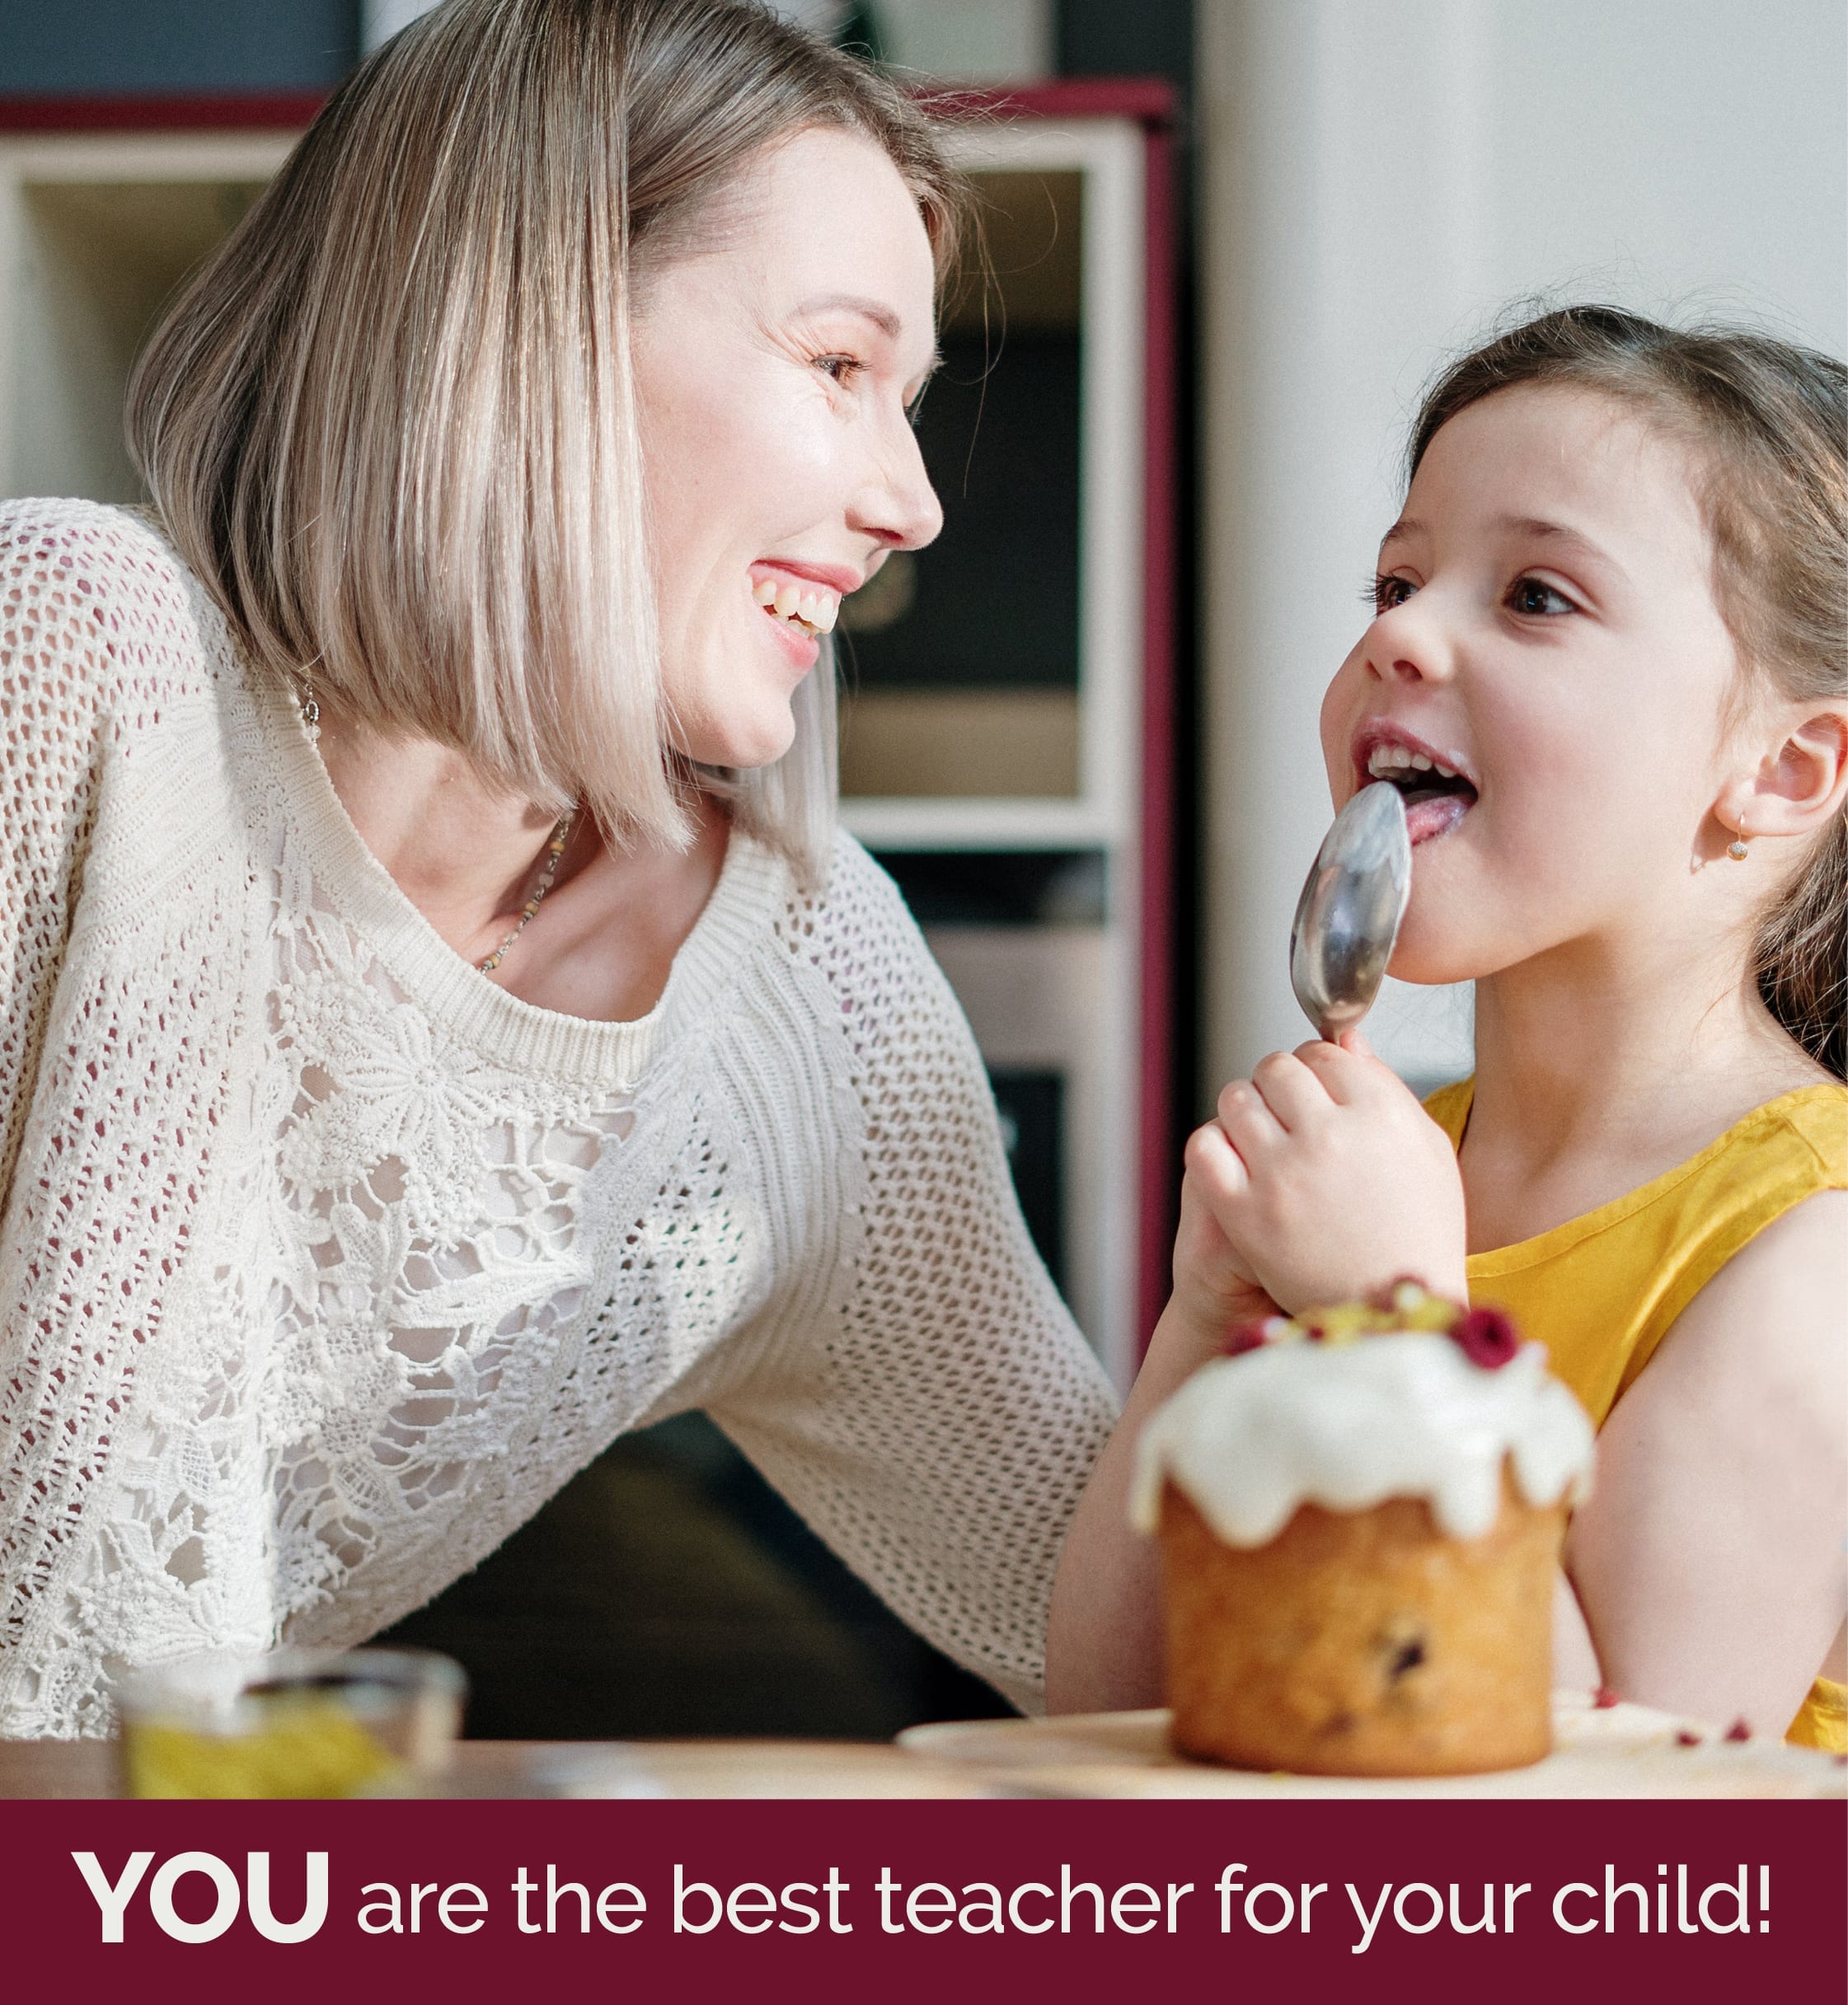 You are the best teacher for your child!